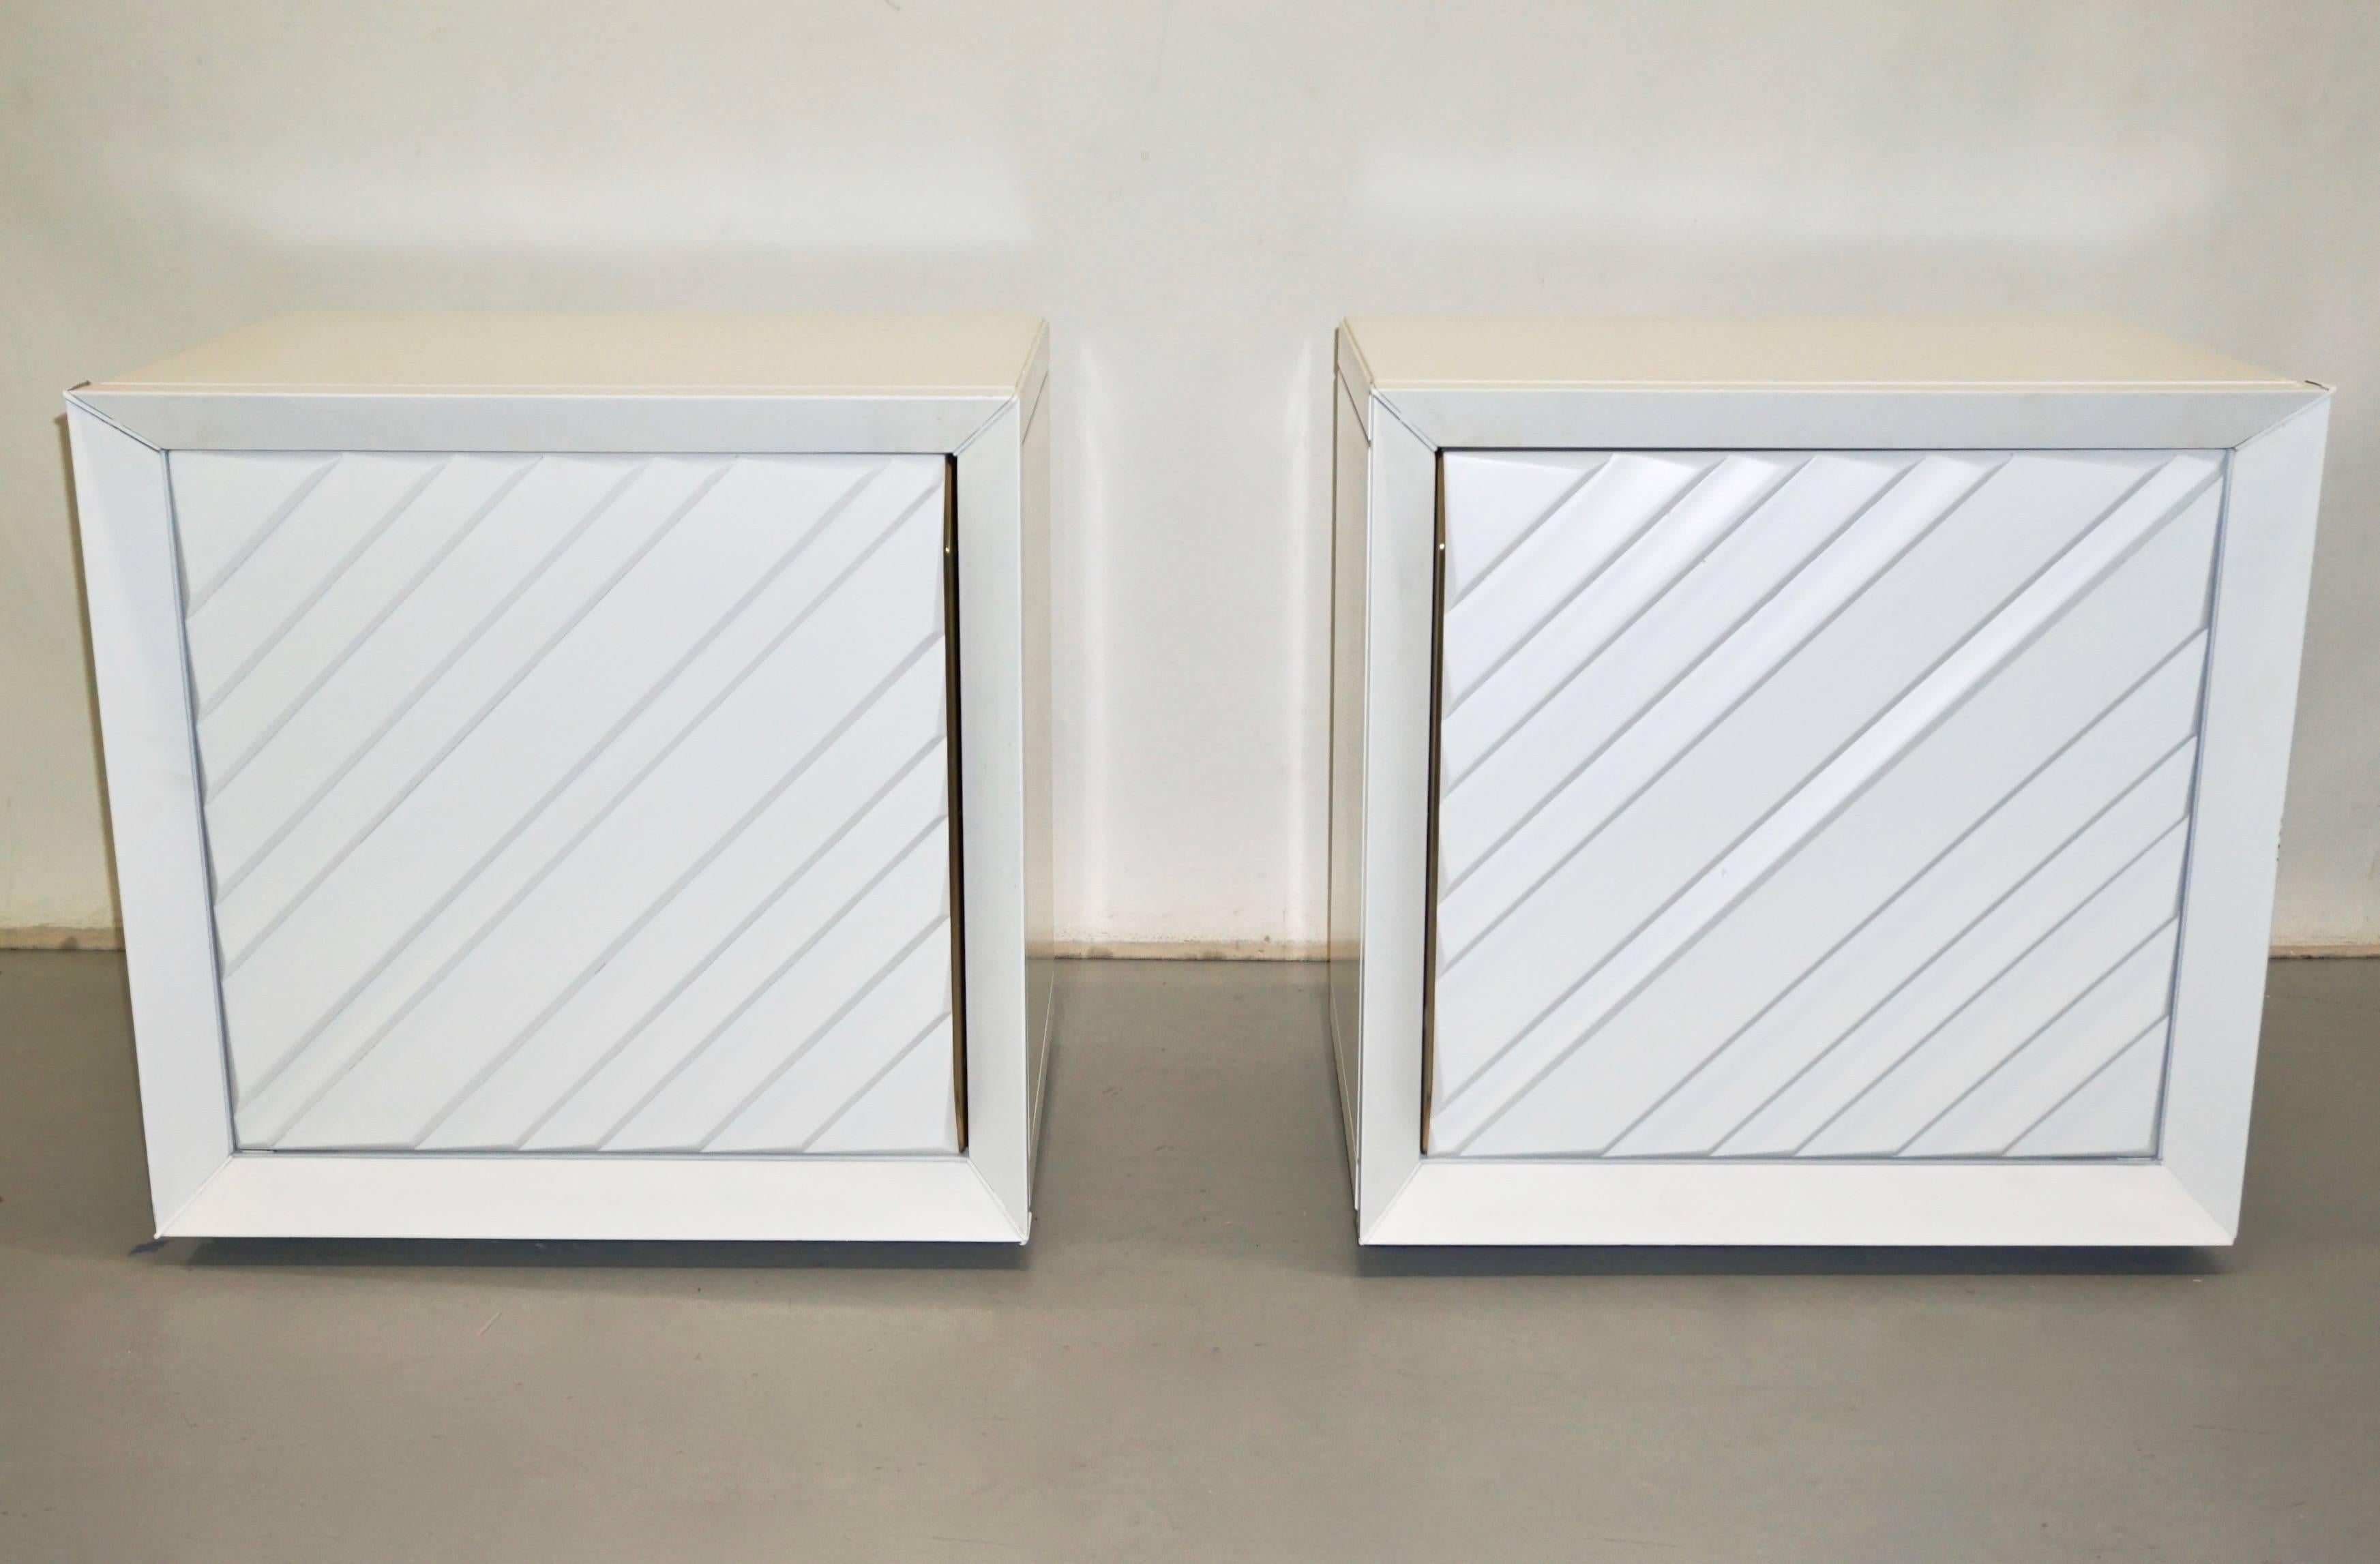 Italian 1970s pair of white lacquered side tables or nightstands from a Milanese house in San Siro, made in Italy, designed by Giusta Collini for Frigerio di Desio, high quality of execution for the uniqueness of the design and choice of materials,